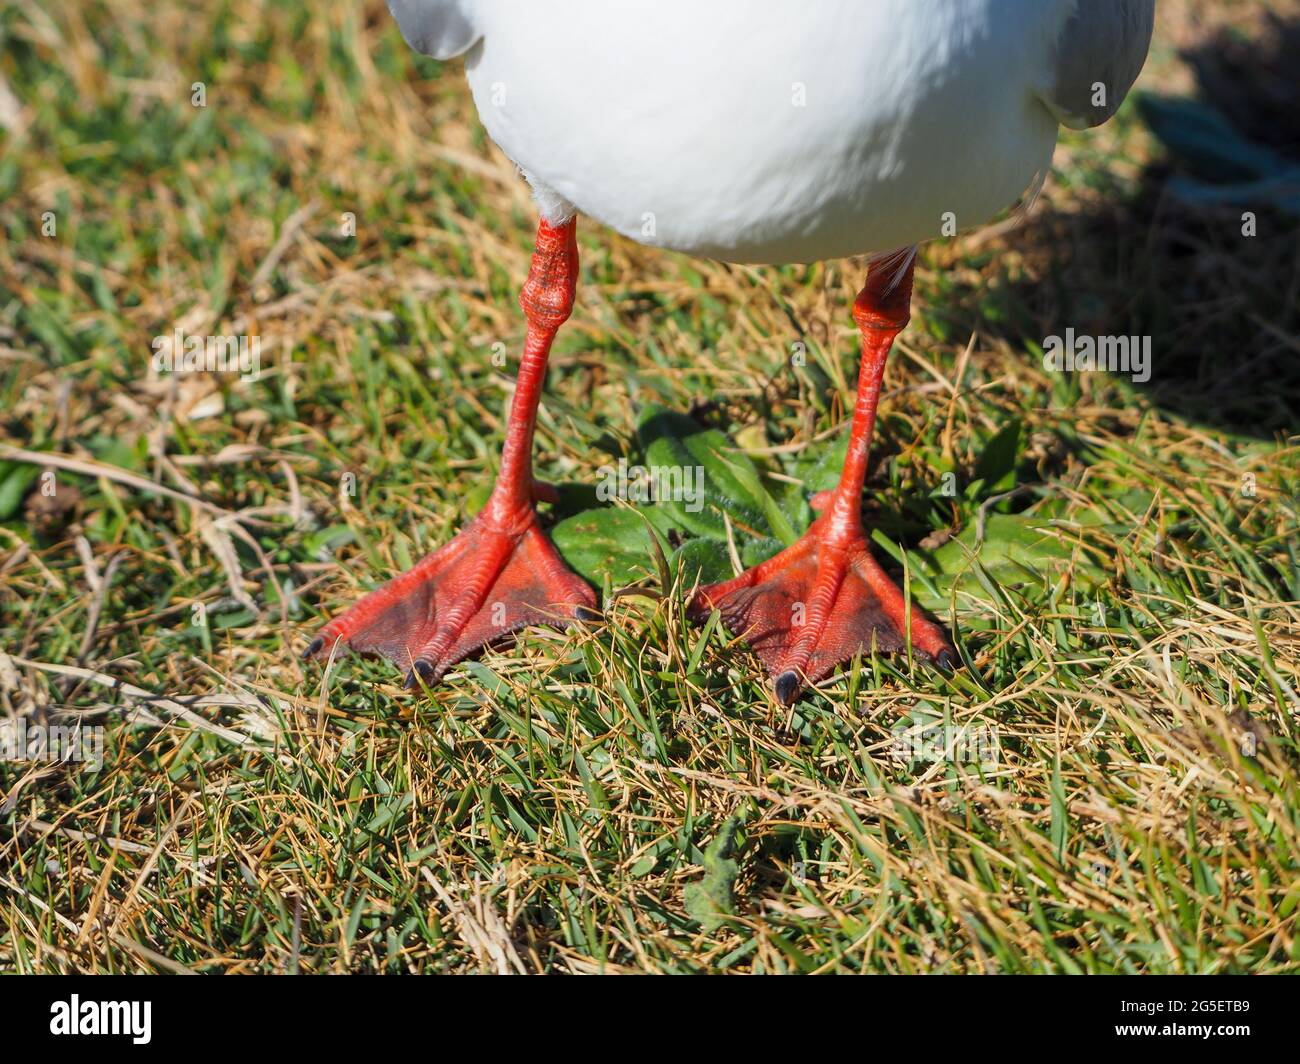 Birds, Closeup of the  red orange webbed feet and legs of a white Seagull, Silver Gull, Australia Stock Photo